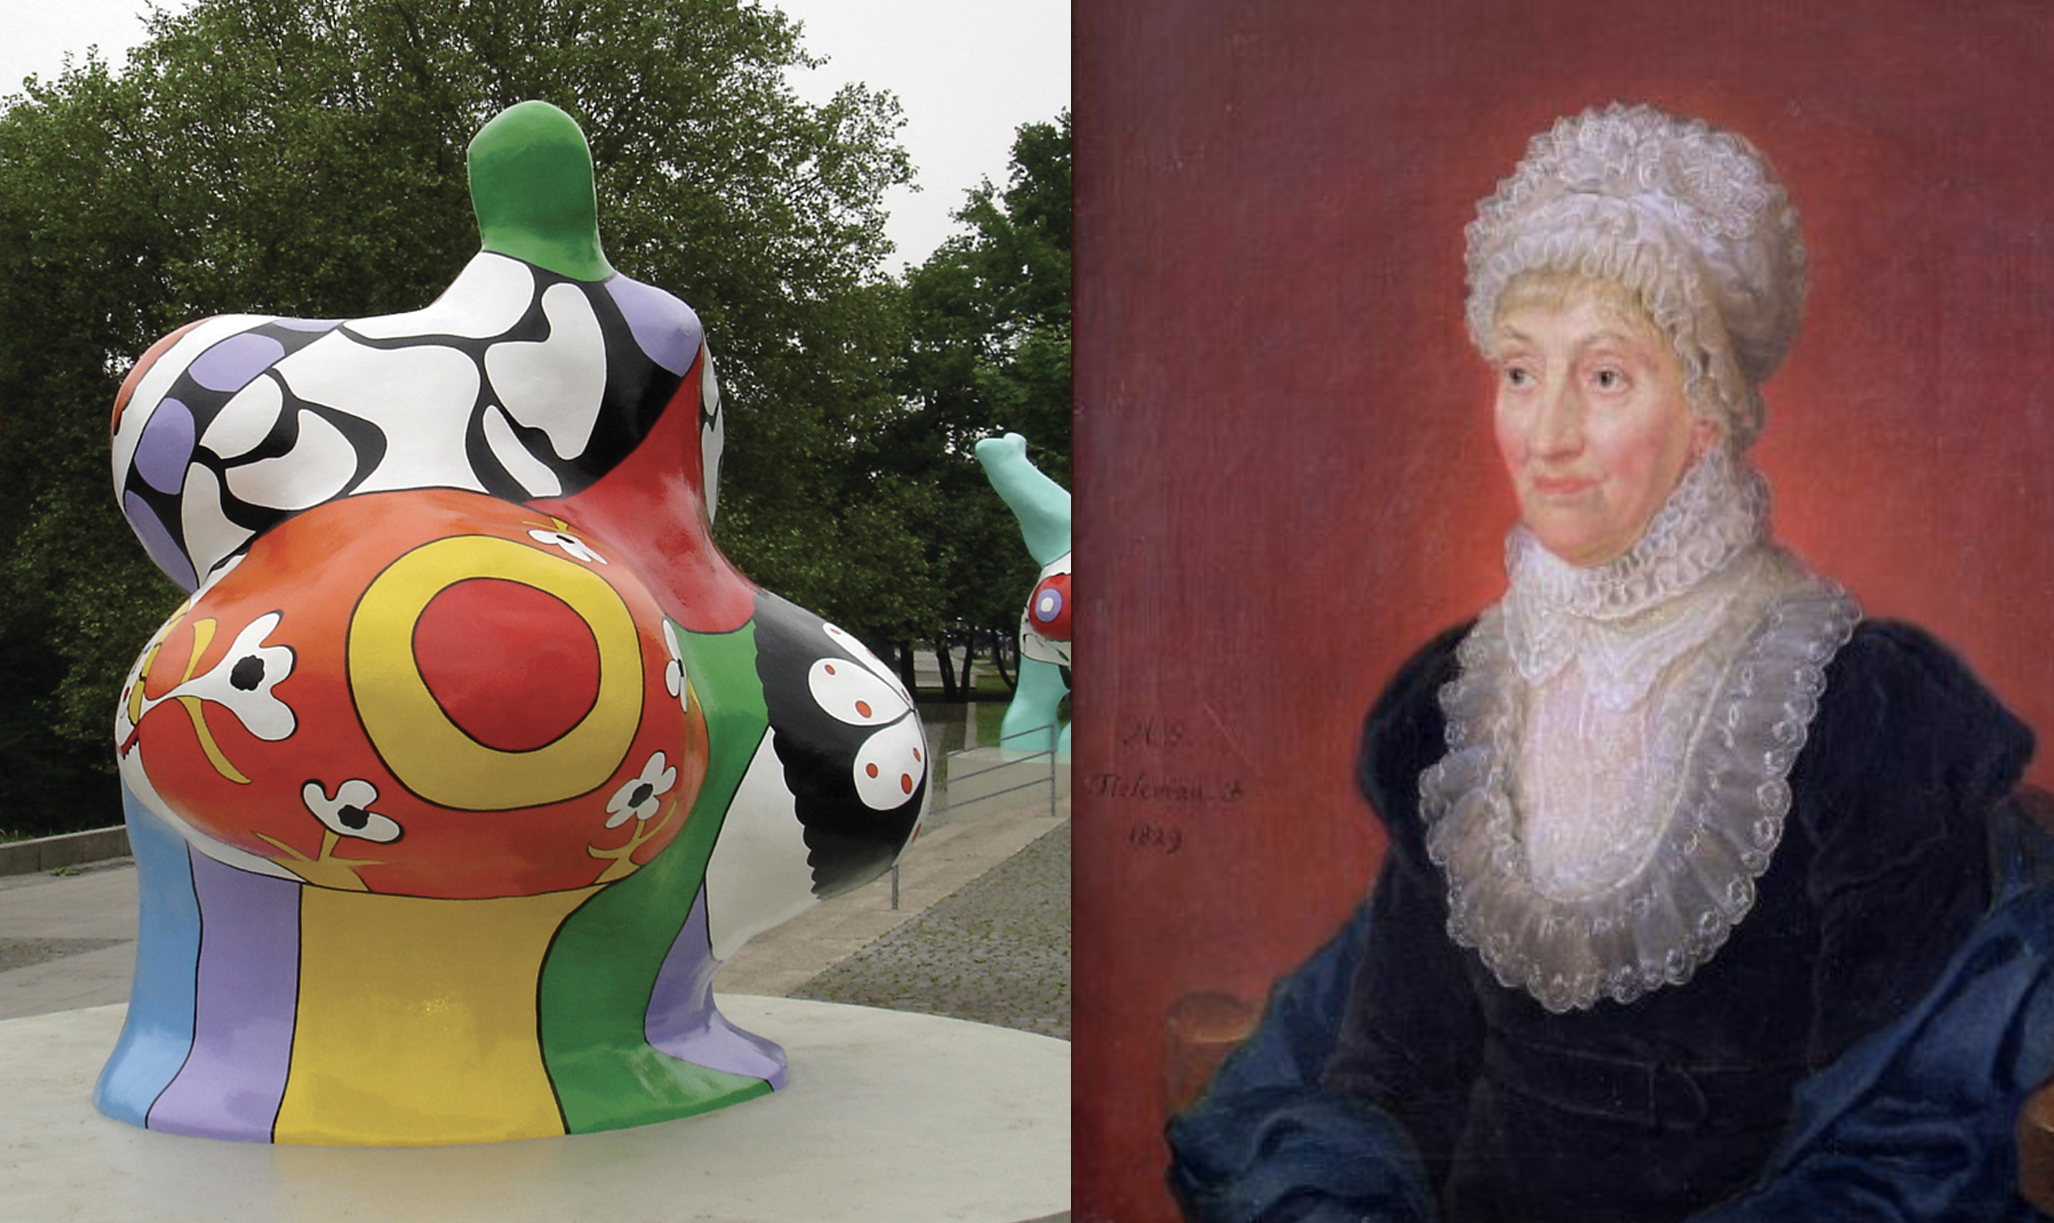 on the left an image of a voluptuous and colorful Nana sculpture; on the right a painted portrait of Caroline Hershel